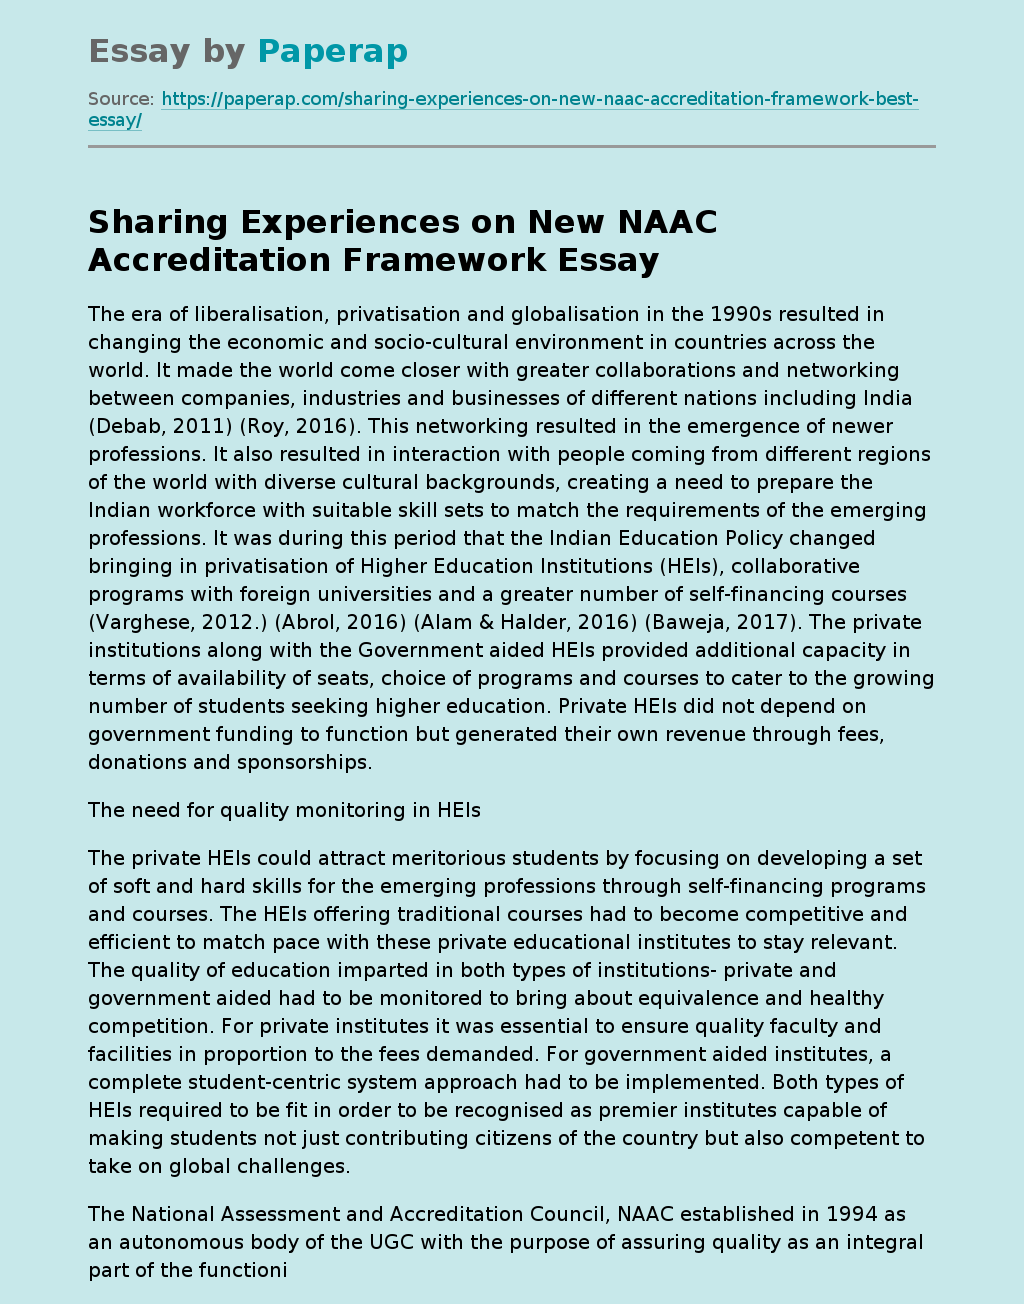 Sharing Experiences on New NAAC Accreditation Framework